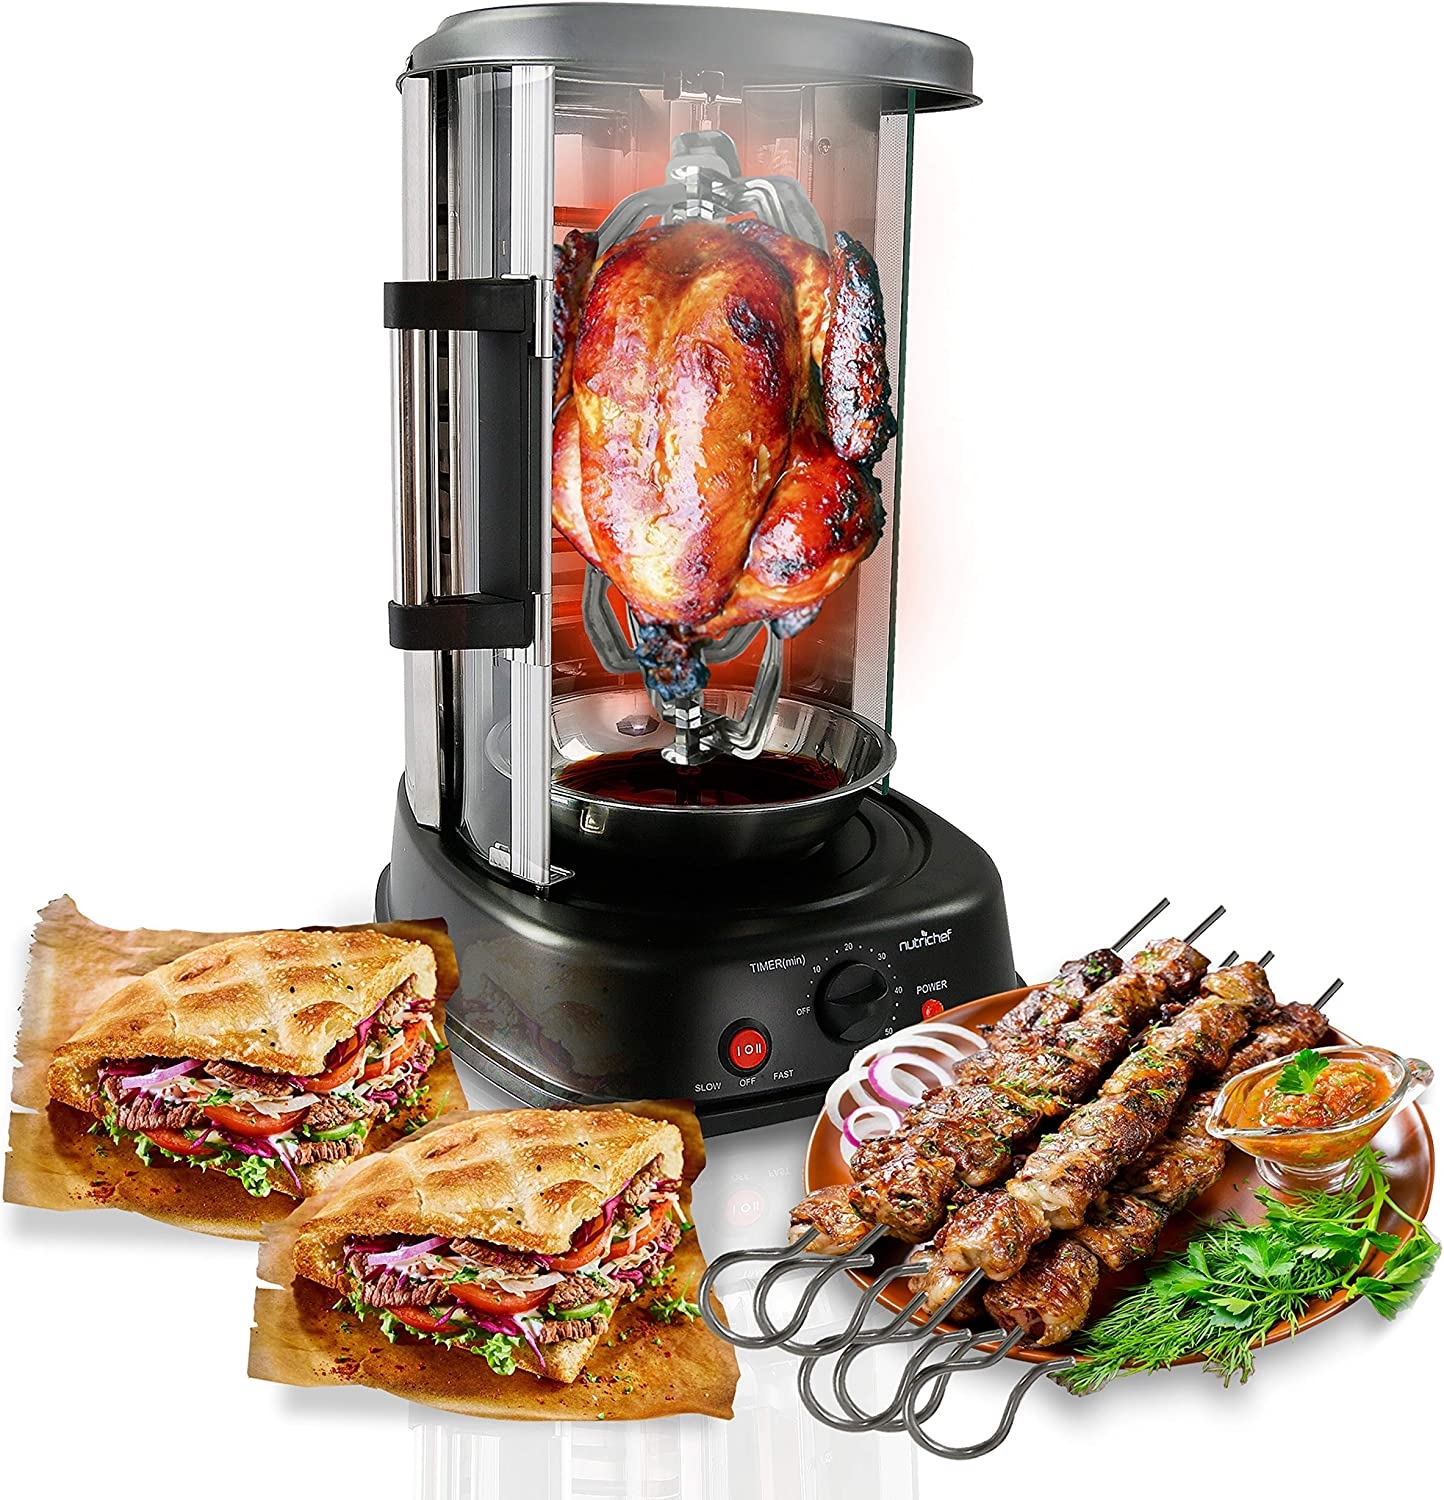 NutriChef Countertop Vertical Rotating Oven – Rotisserie Shawarma Machine, Kebob Machine, Stain Resistant & Energy Efficient W/